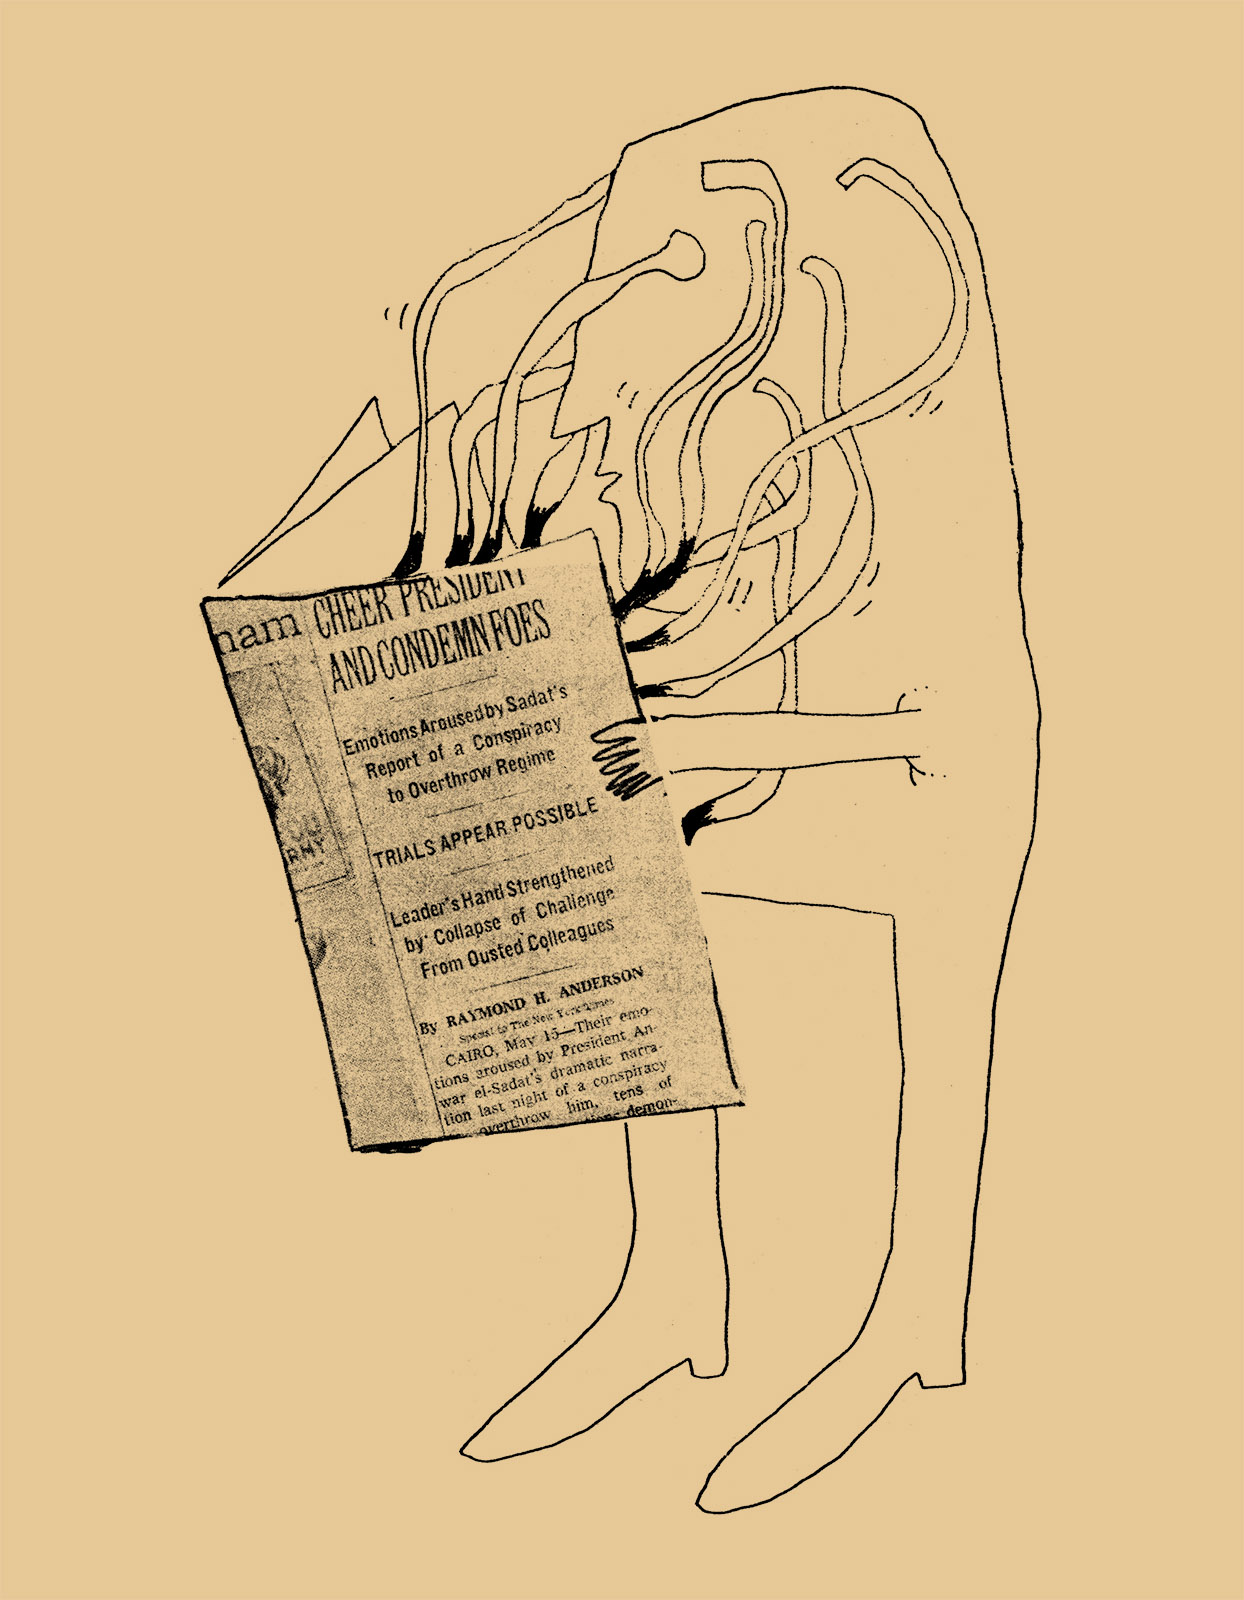 A line drawing of a standing figure reading the New York Times. Eight tendrils extend from the figure’s head into the newspaper spread.